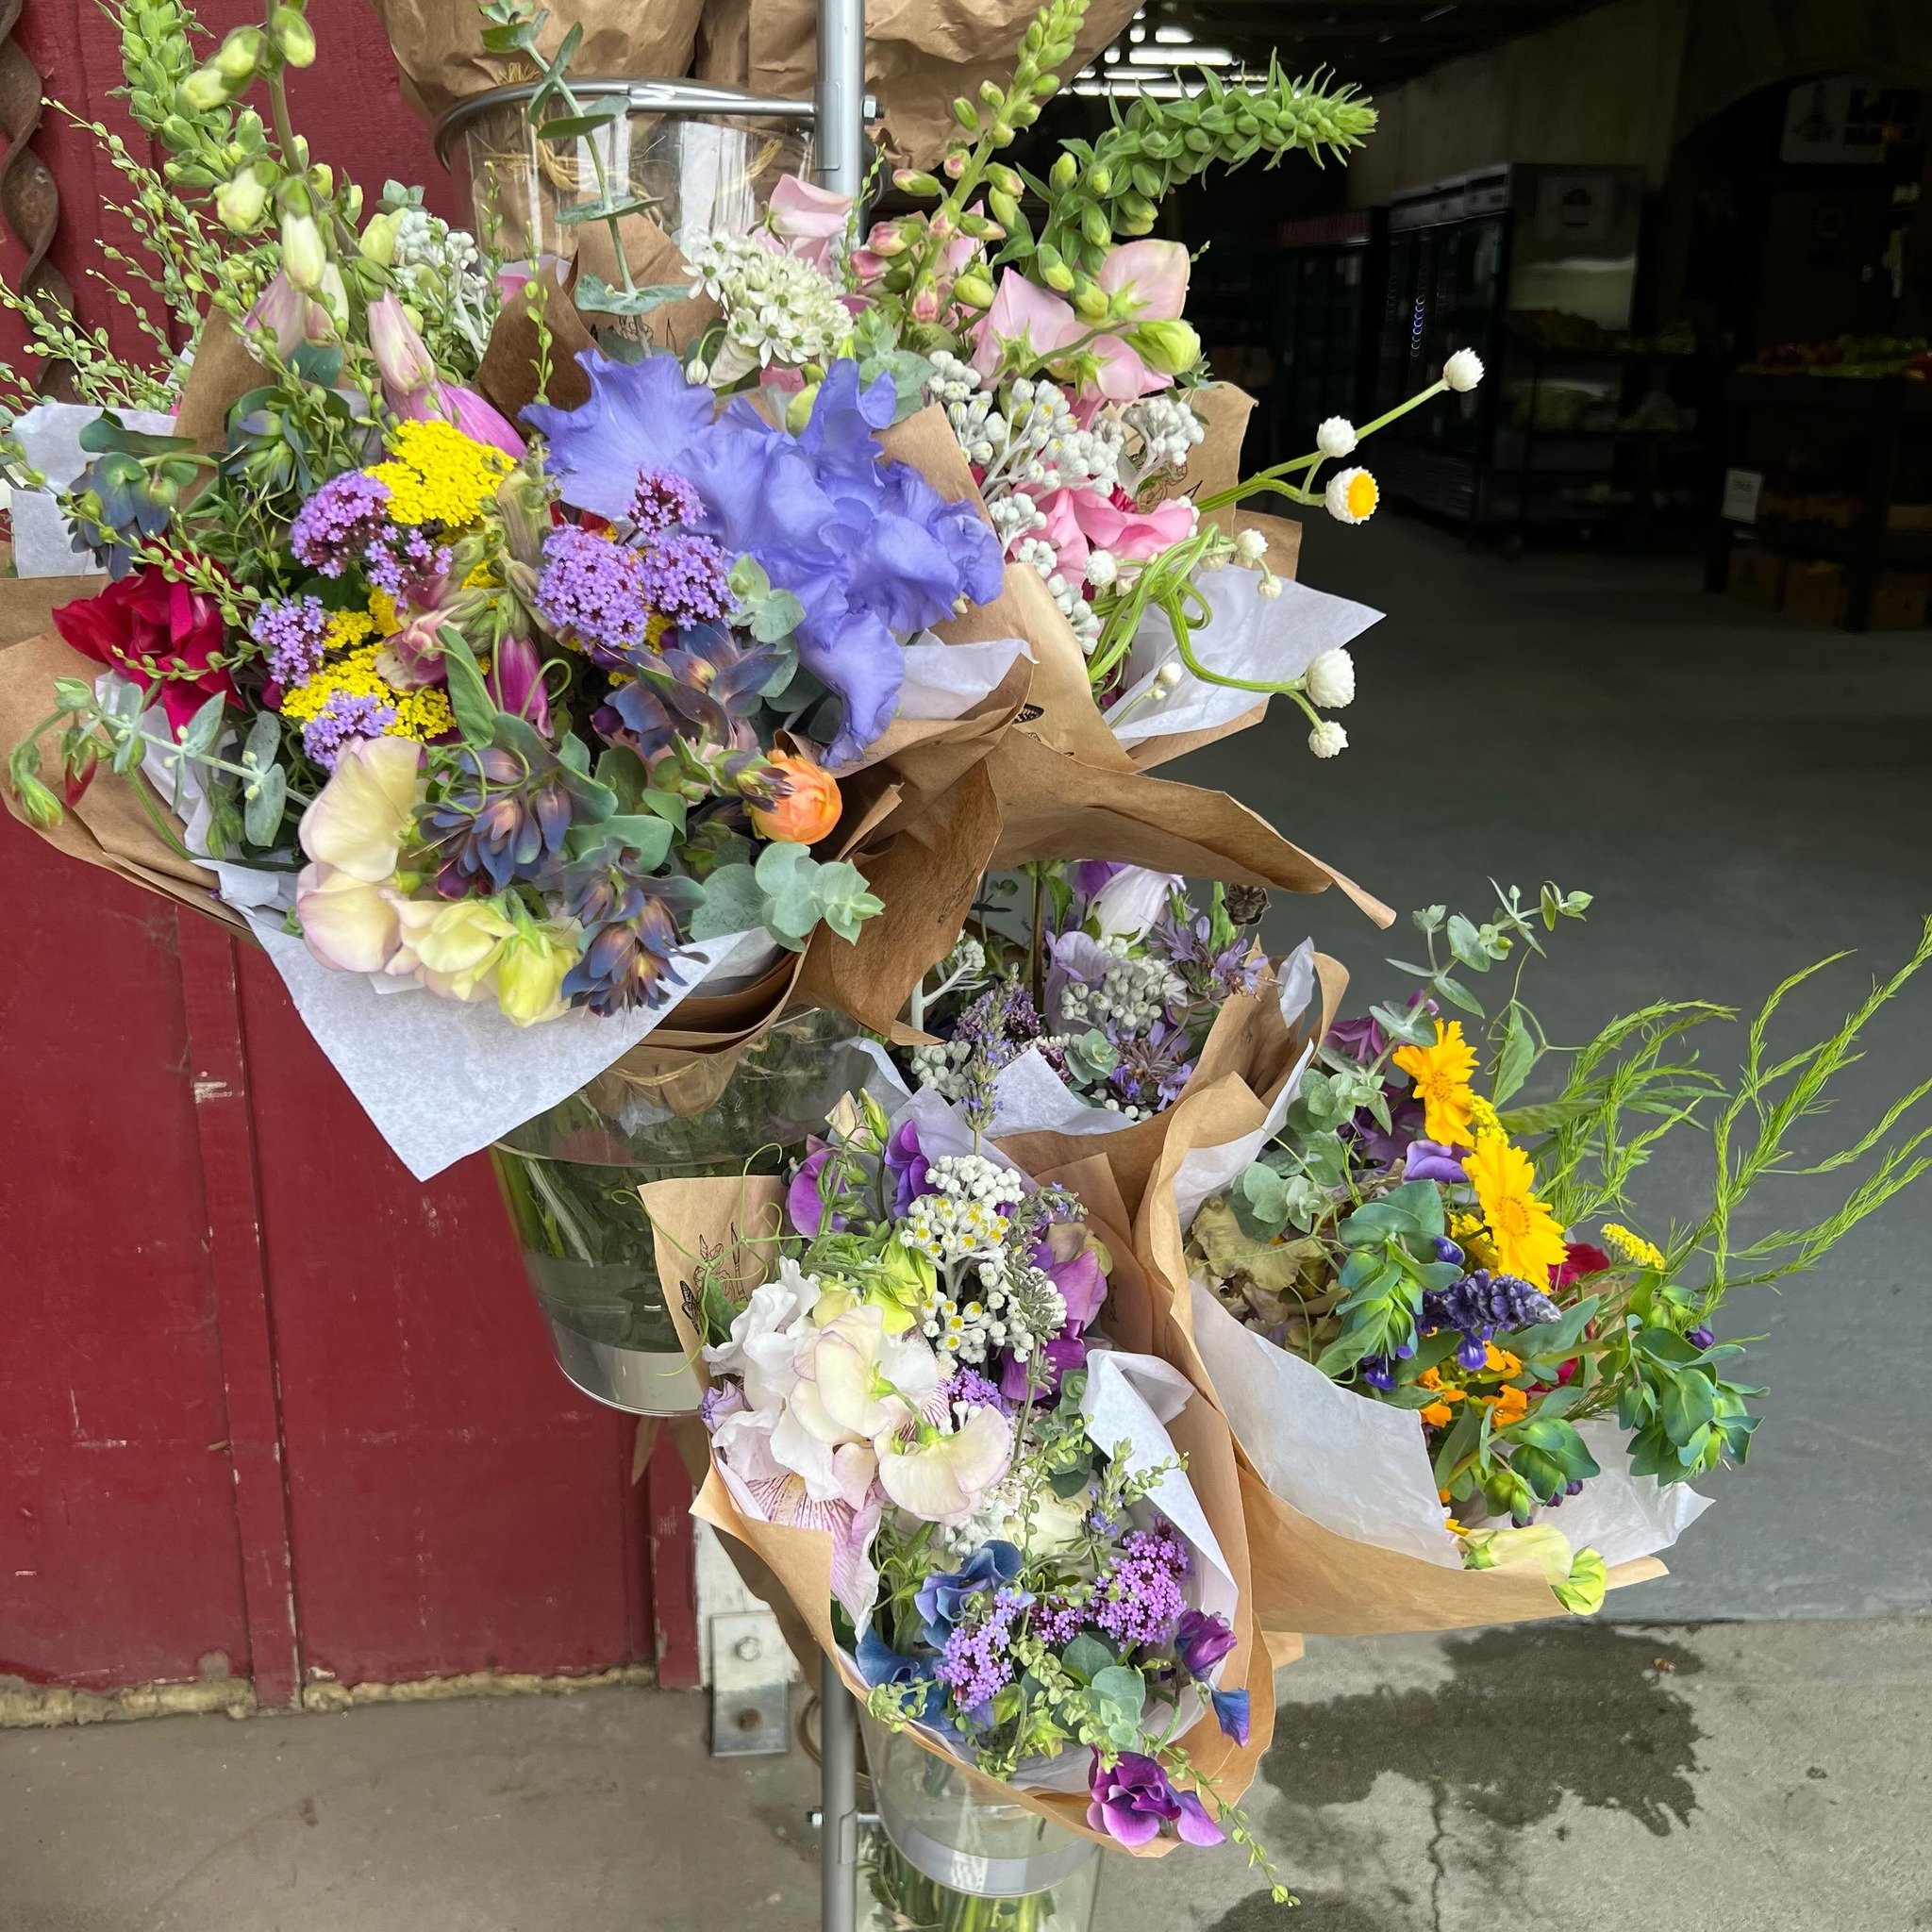 We have flowers from @artistsgardenoasis for sale today! In case you missed them at the event yesterday, you can still pick up one of their beautiful arrangements at the store.